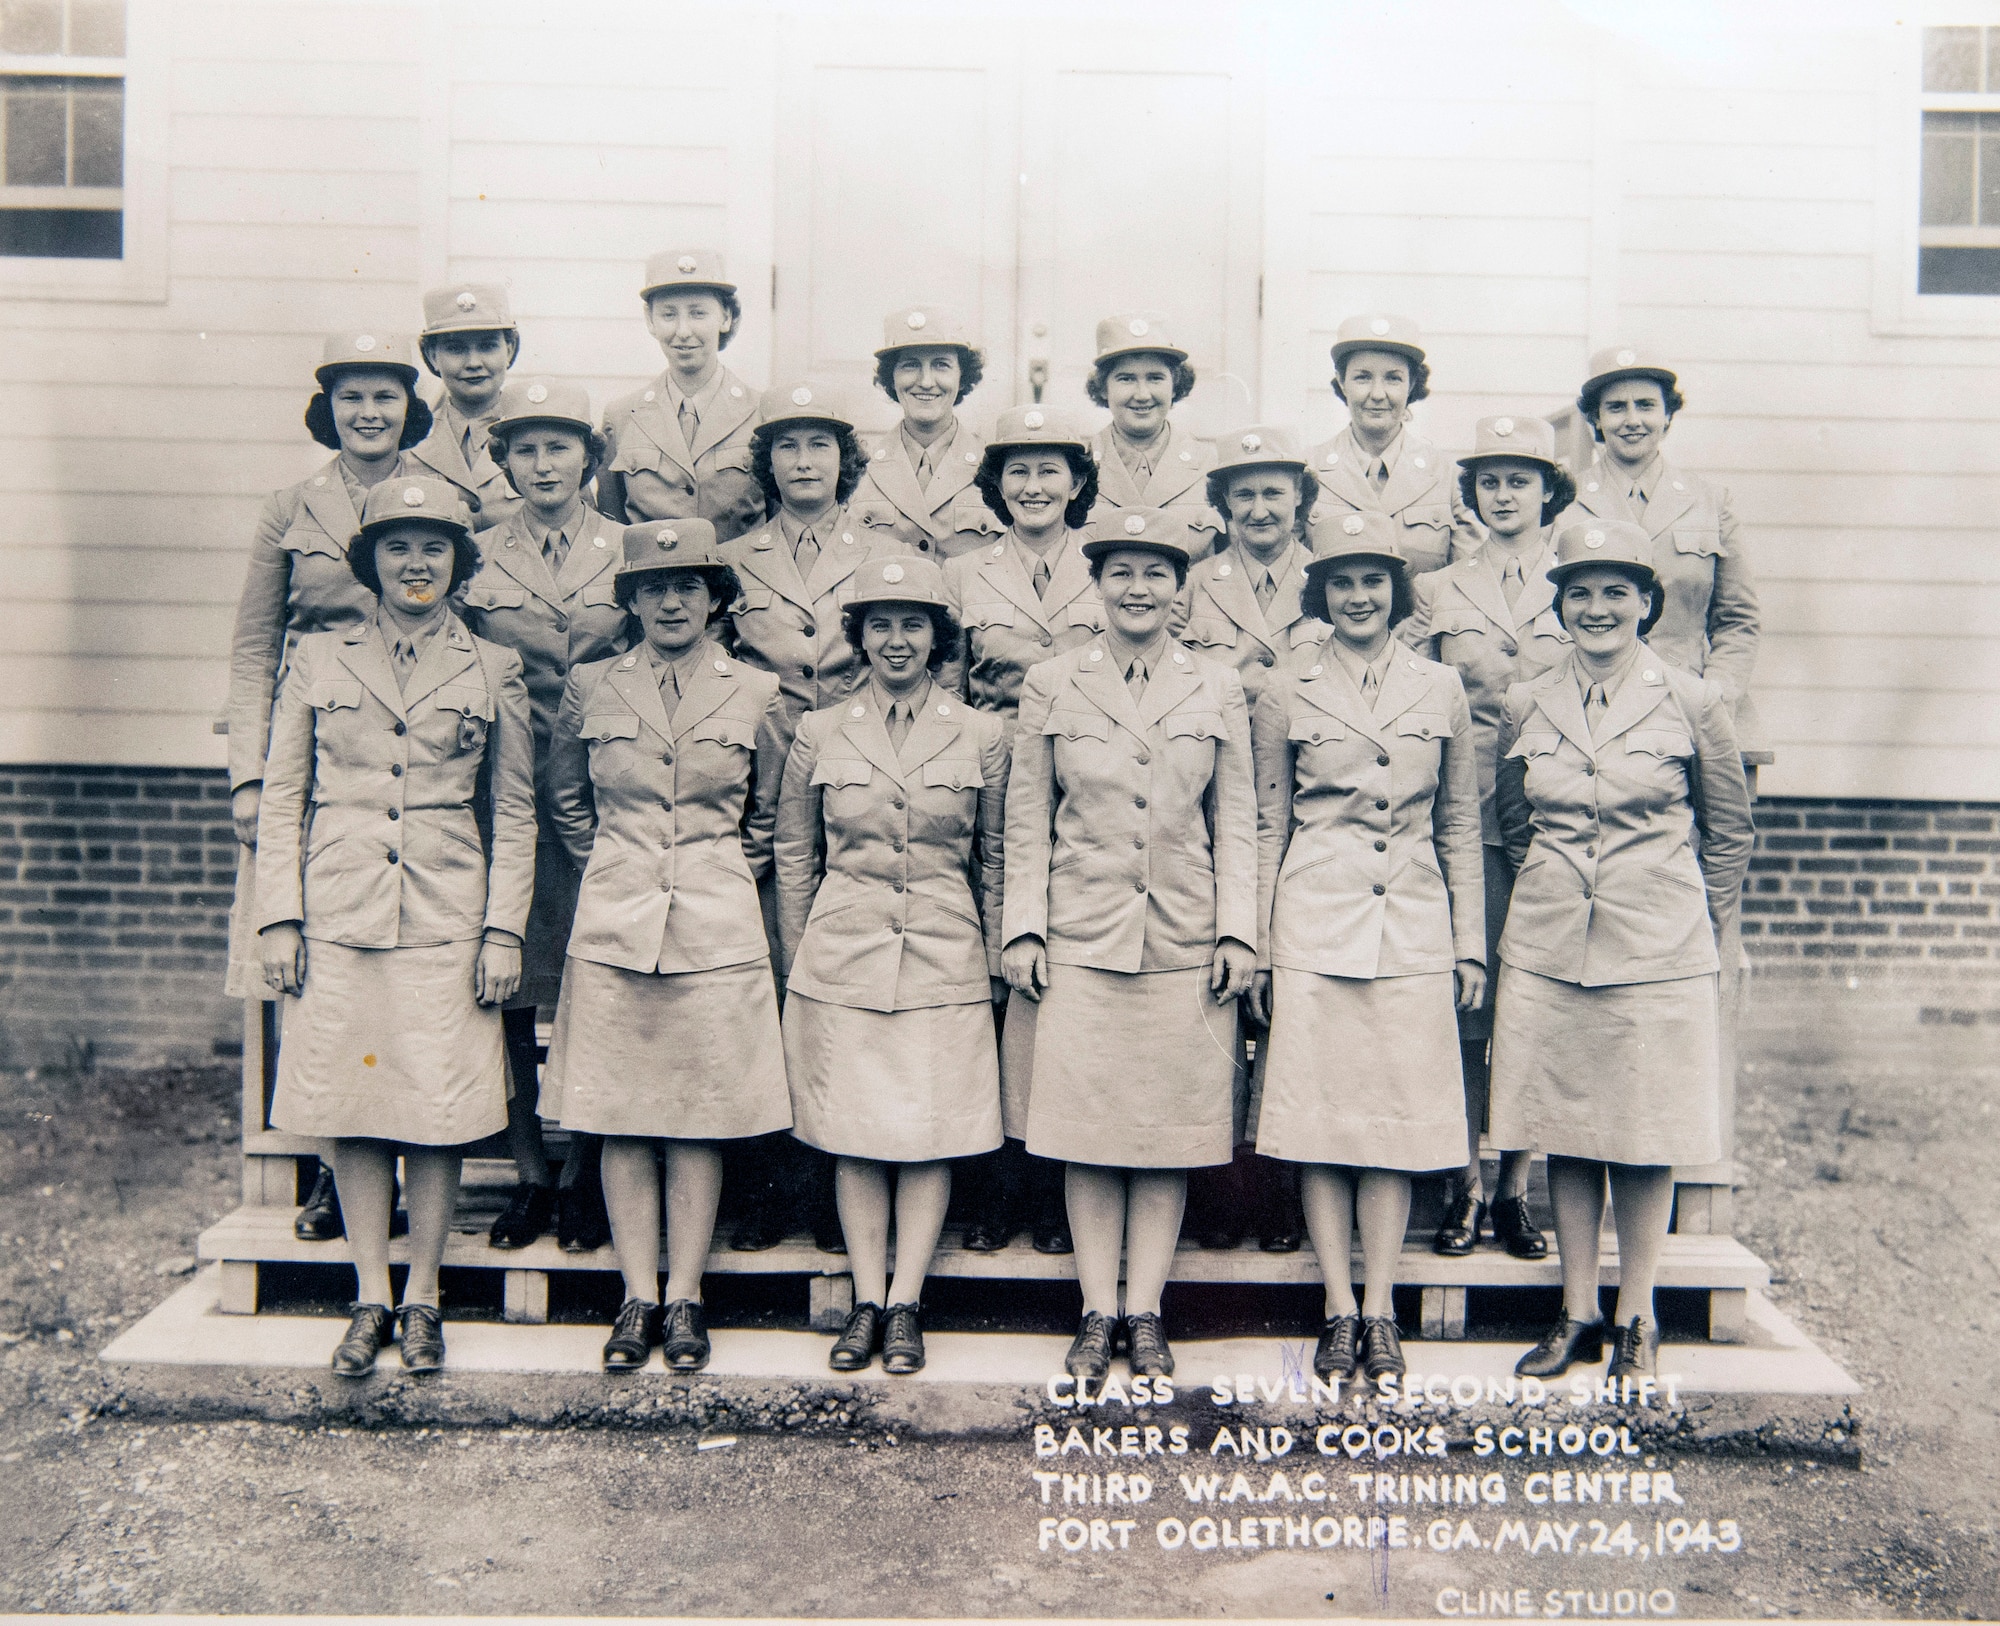 A photo of Lorraine Vogelsang’s Bakers and Cooks School class at Fort Oglethorpe, Georgia, sits on display inside her Cincinnati, Ohio, home, Aug. 19, 2021. Vogelsang served in the Women’s Army Corps from February 1943 until August 1945. (U.S. Air Force photo by Wesley Farnsworth)